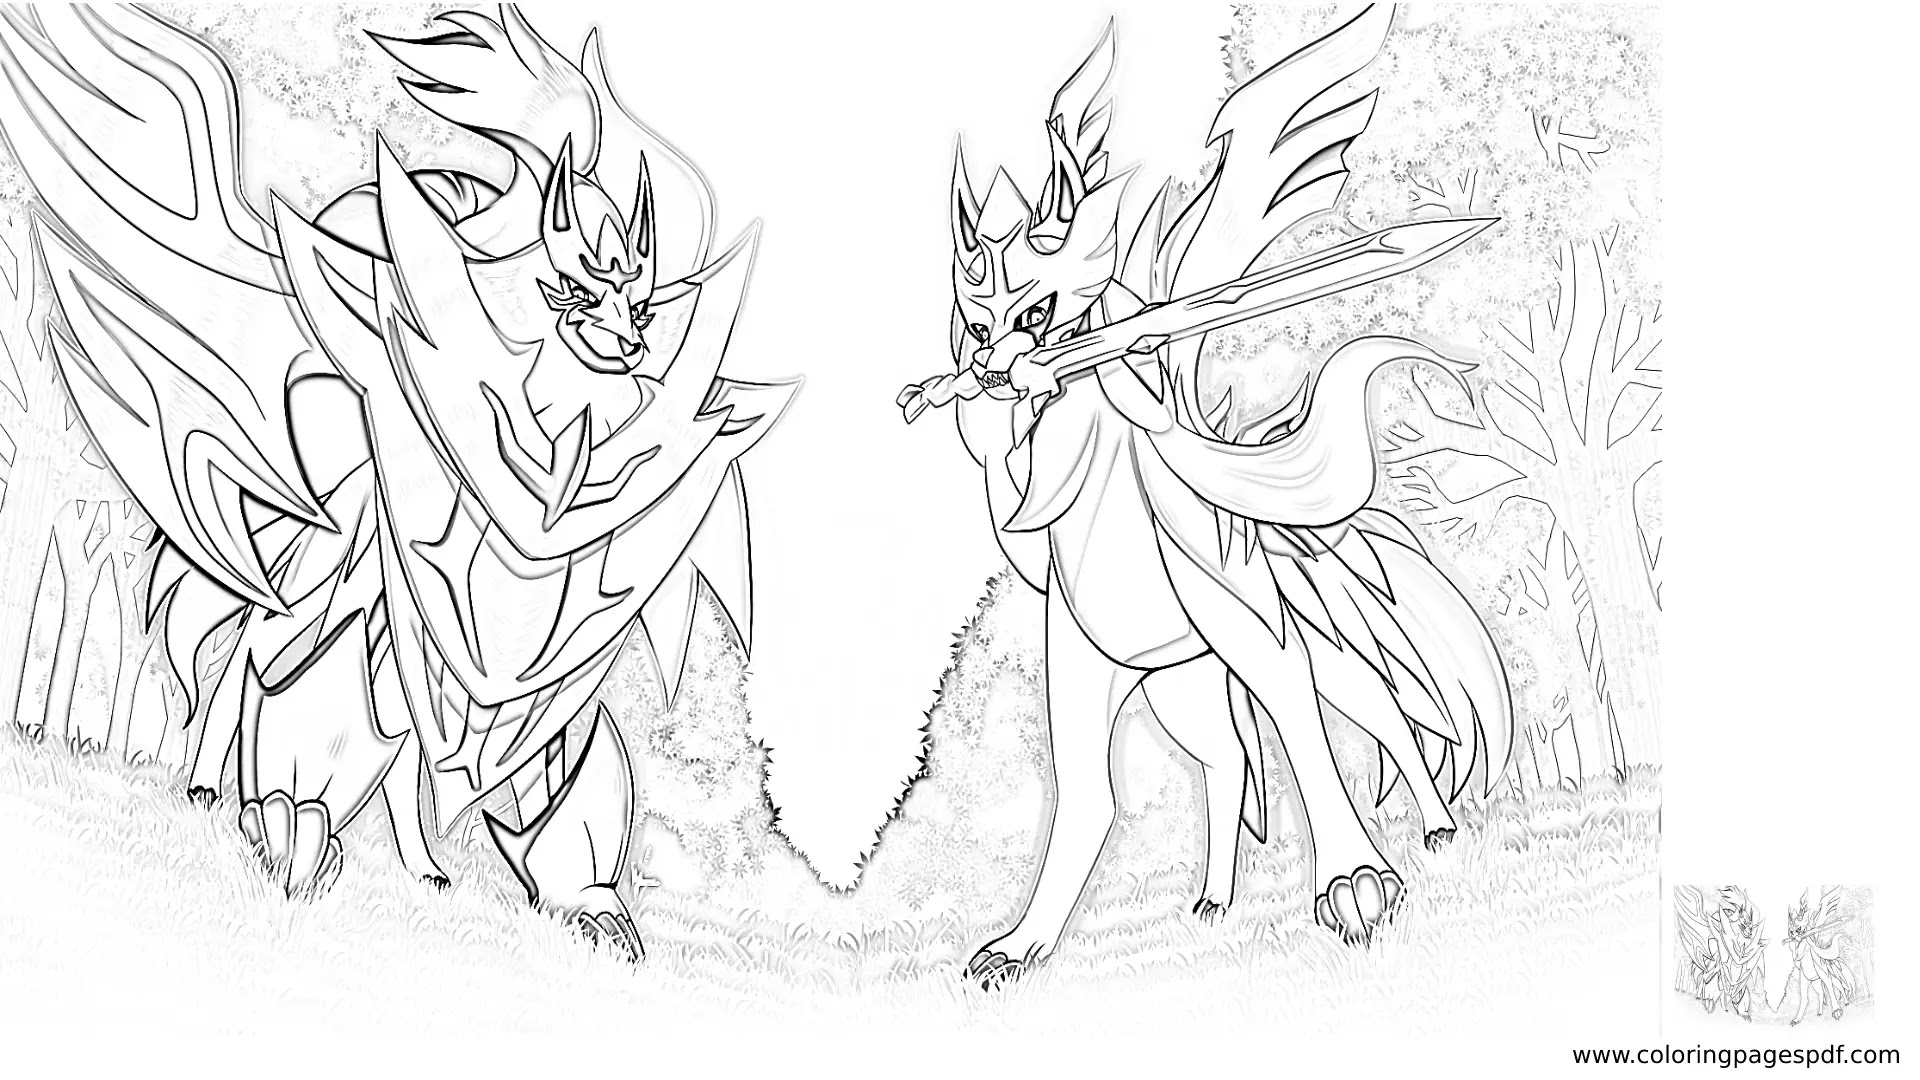 Coloring Page Of Zacian And Zamazenta In A Forest